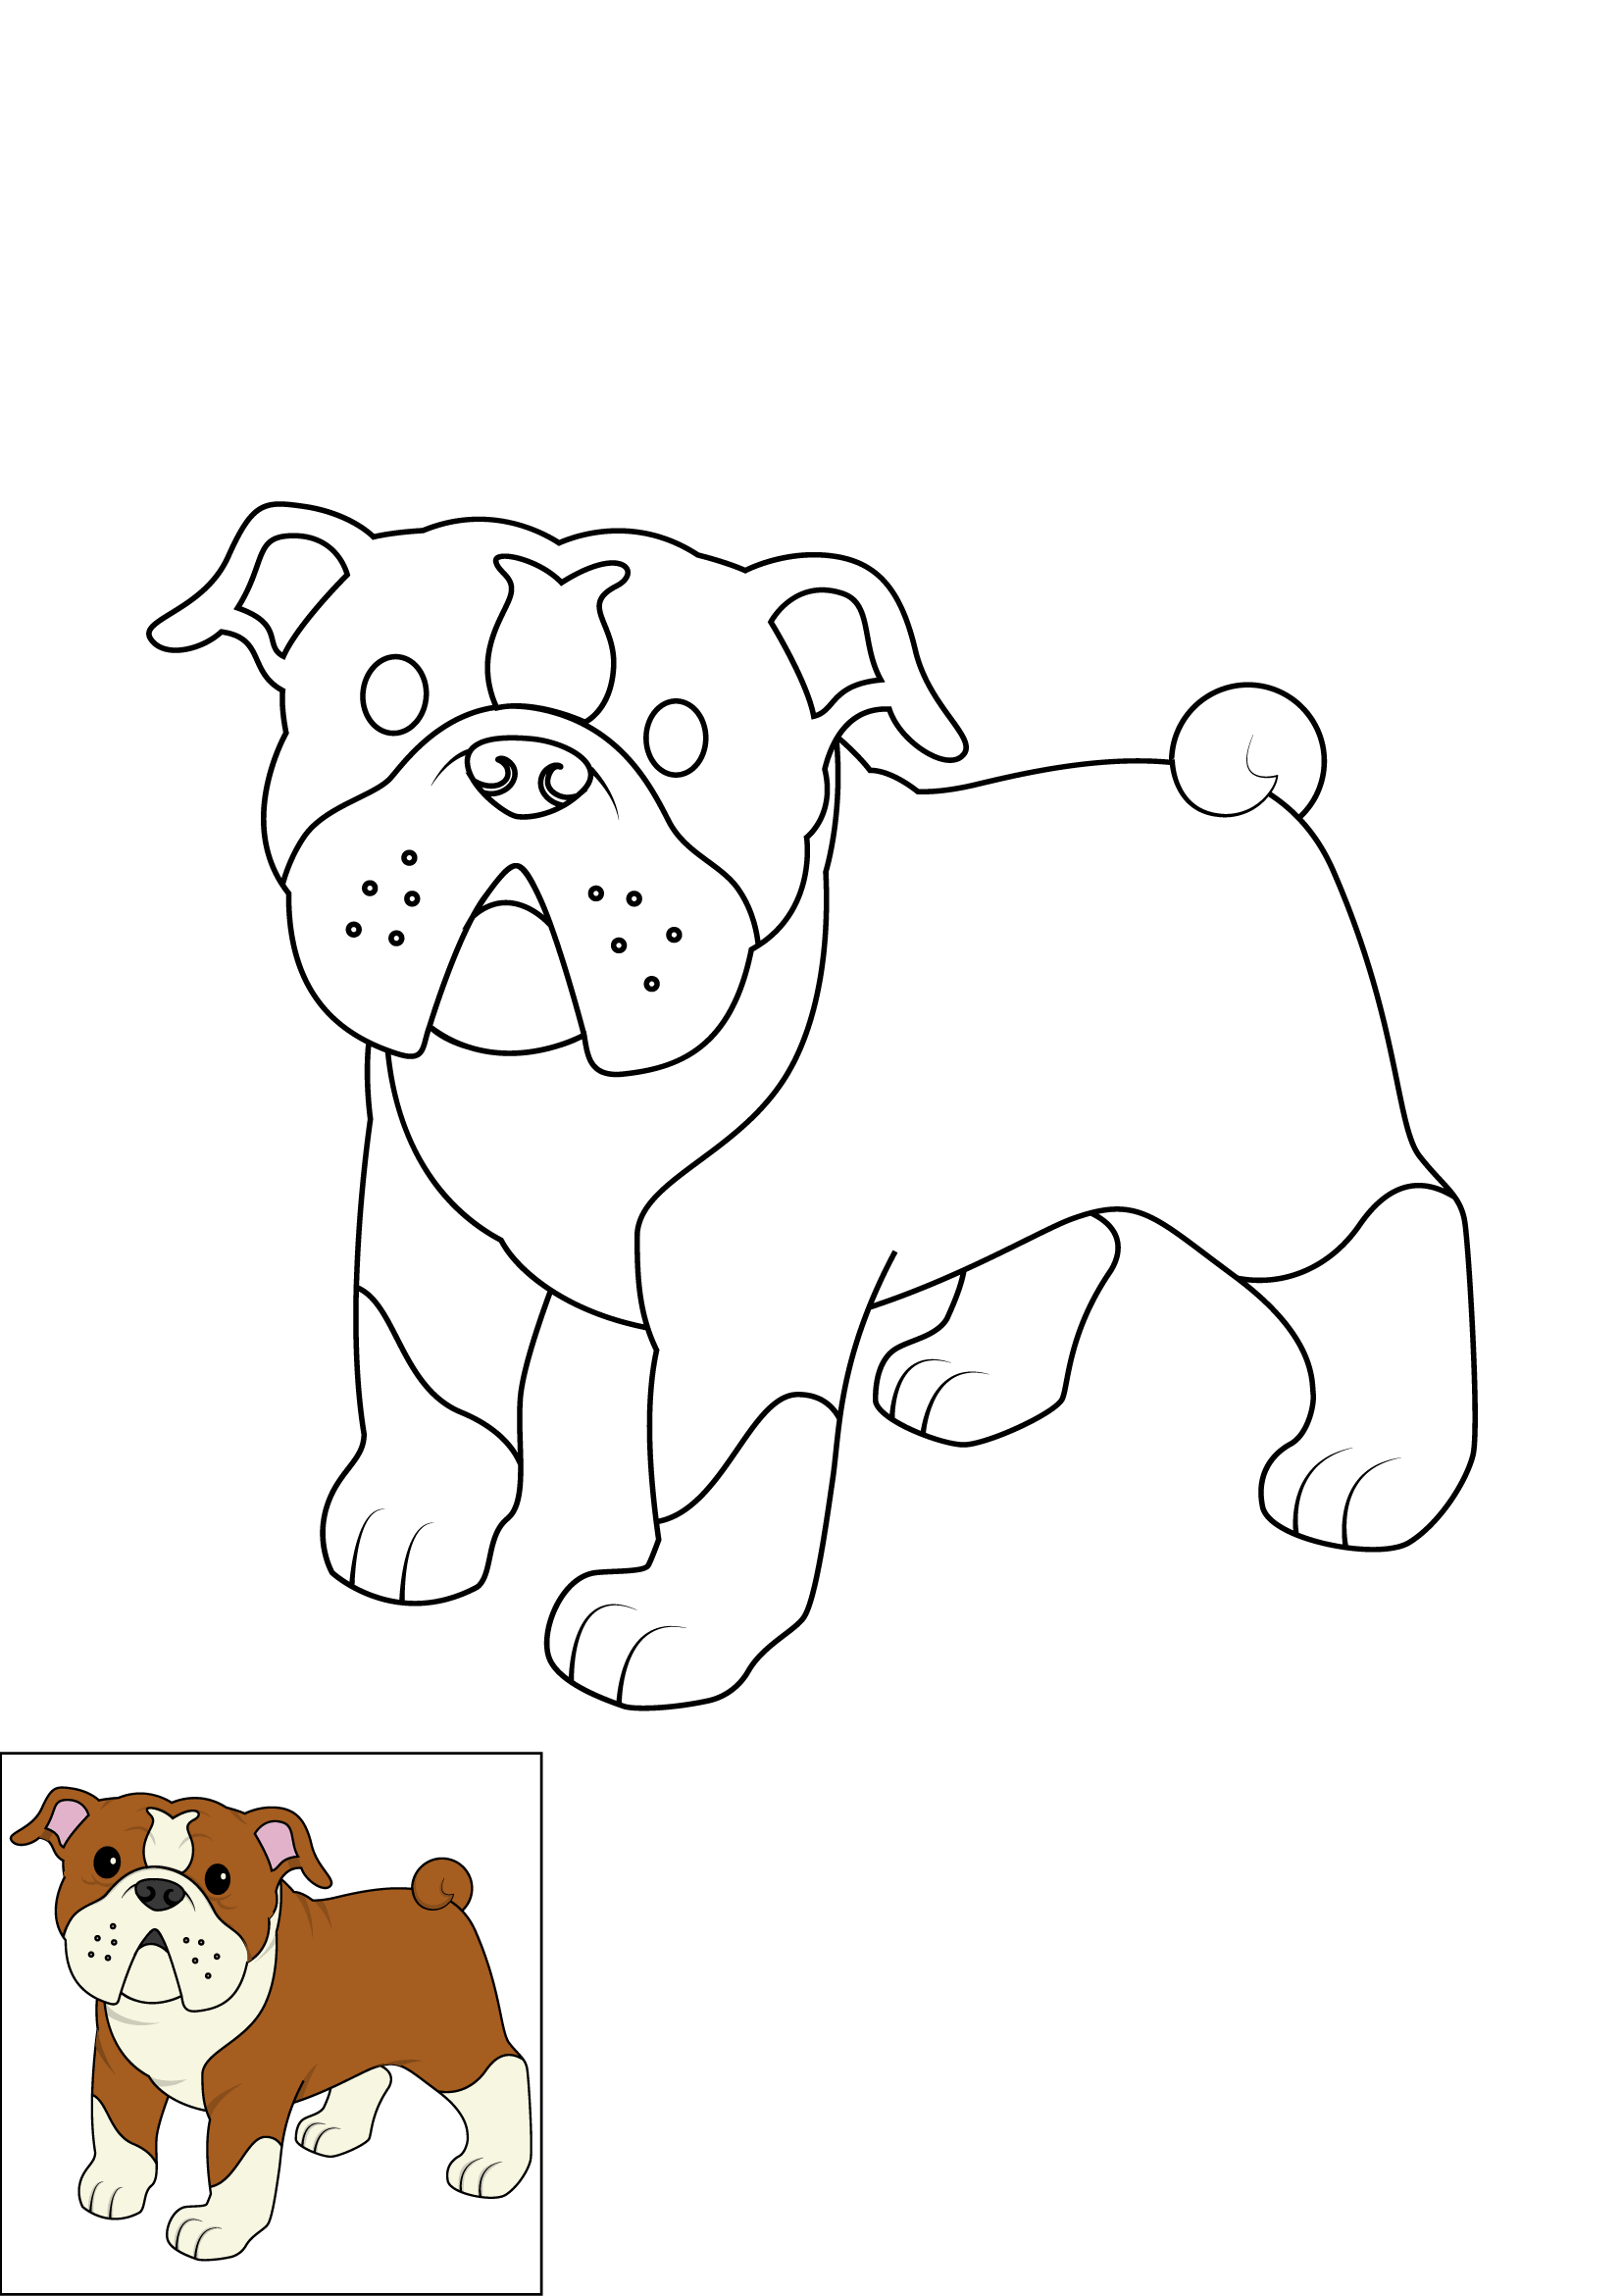 How to Draw A Bulldog Step by Step Printable Color